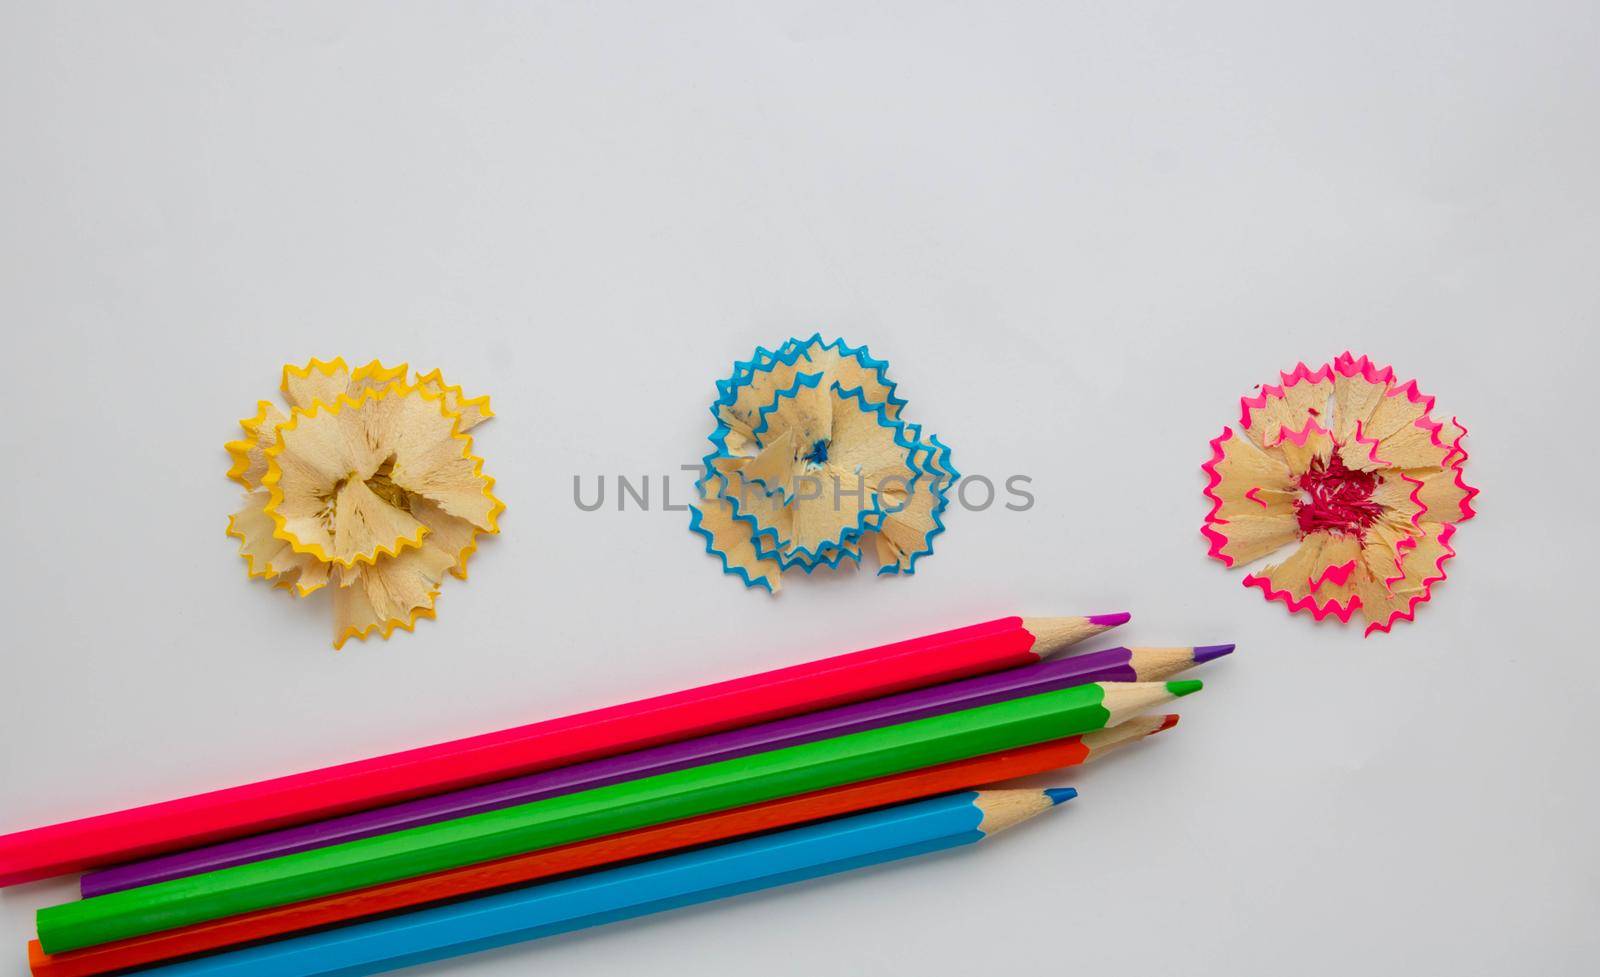 Colored wooden pencils and shavings lined with flowers, isolated on a white background. Old wooden pencils with garbage, shavings